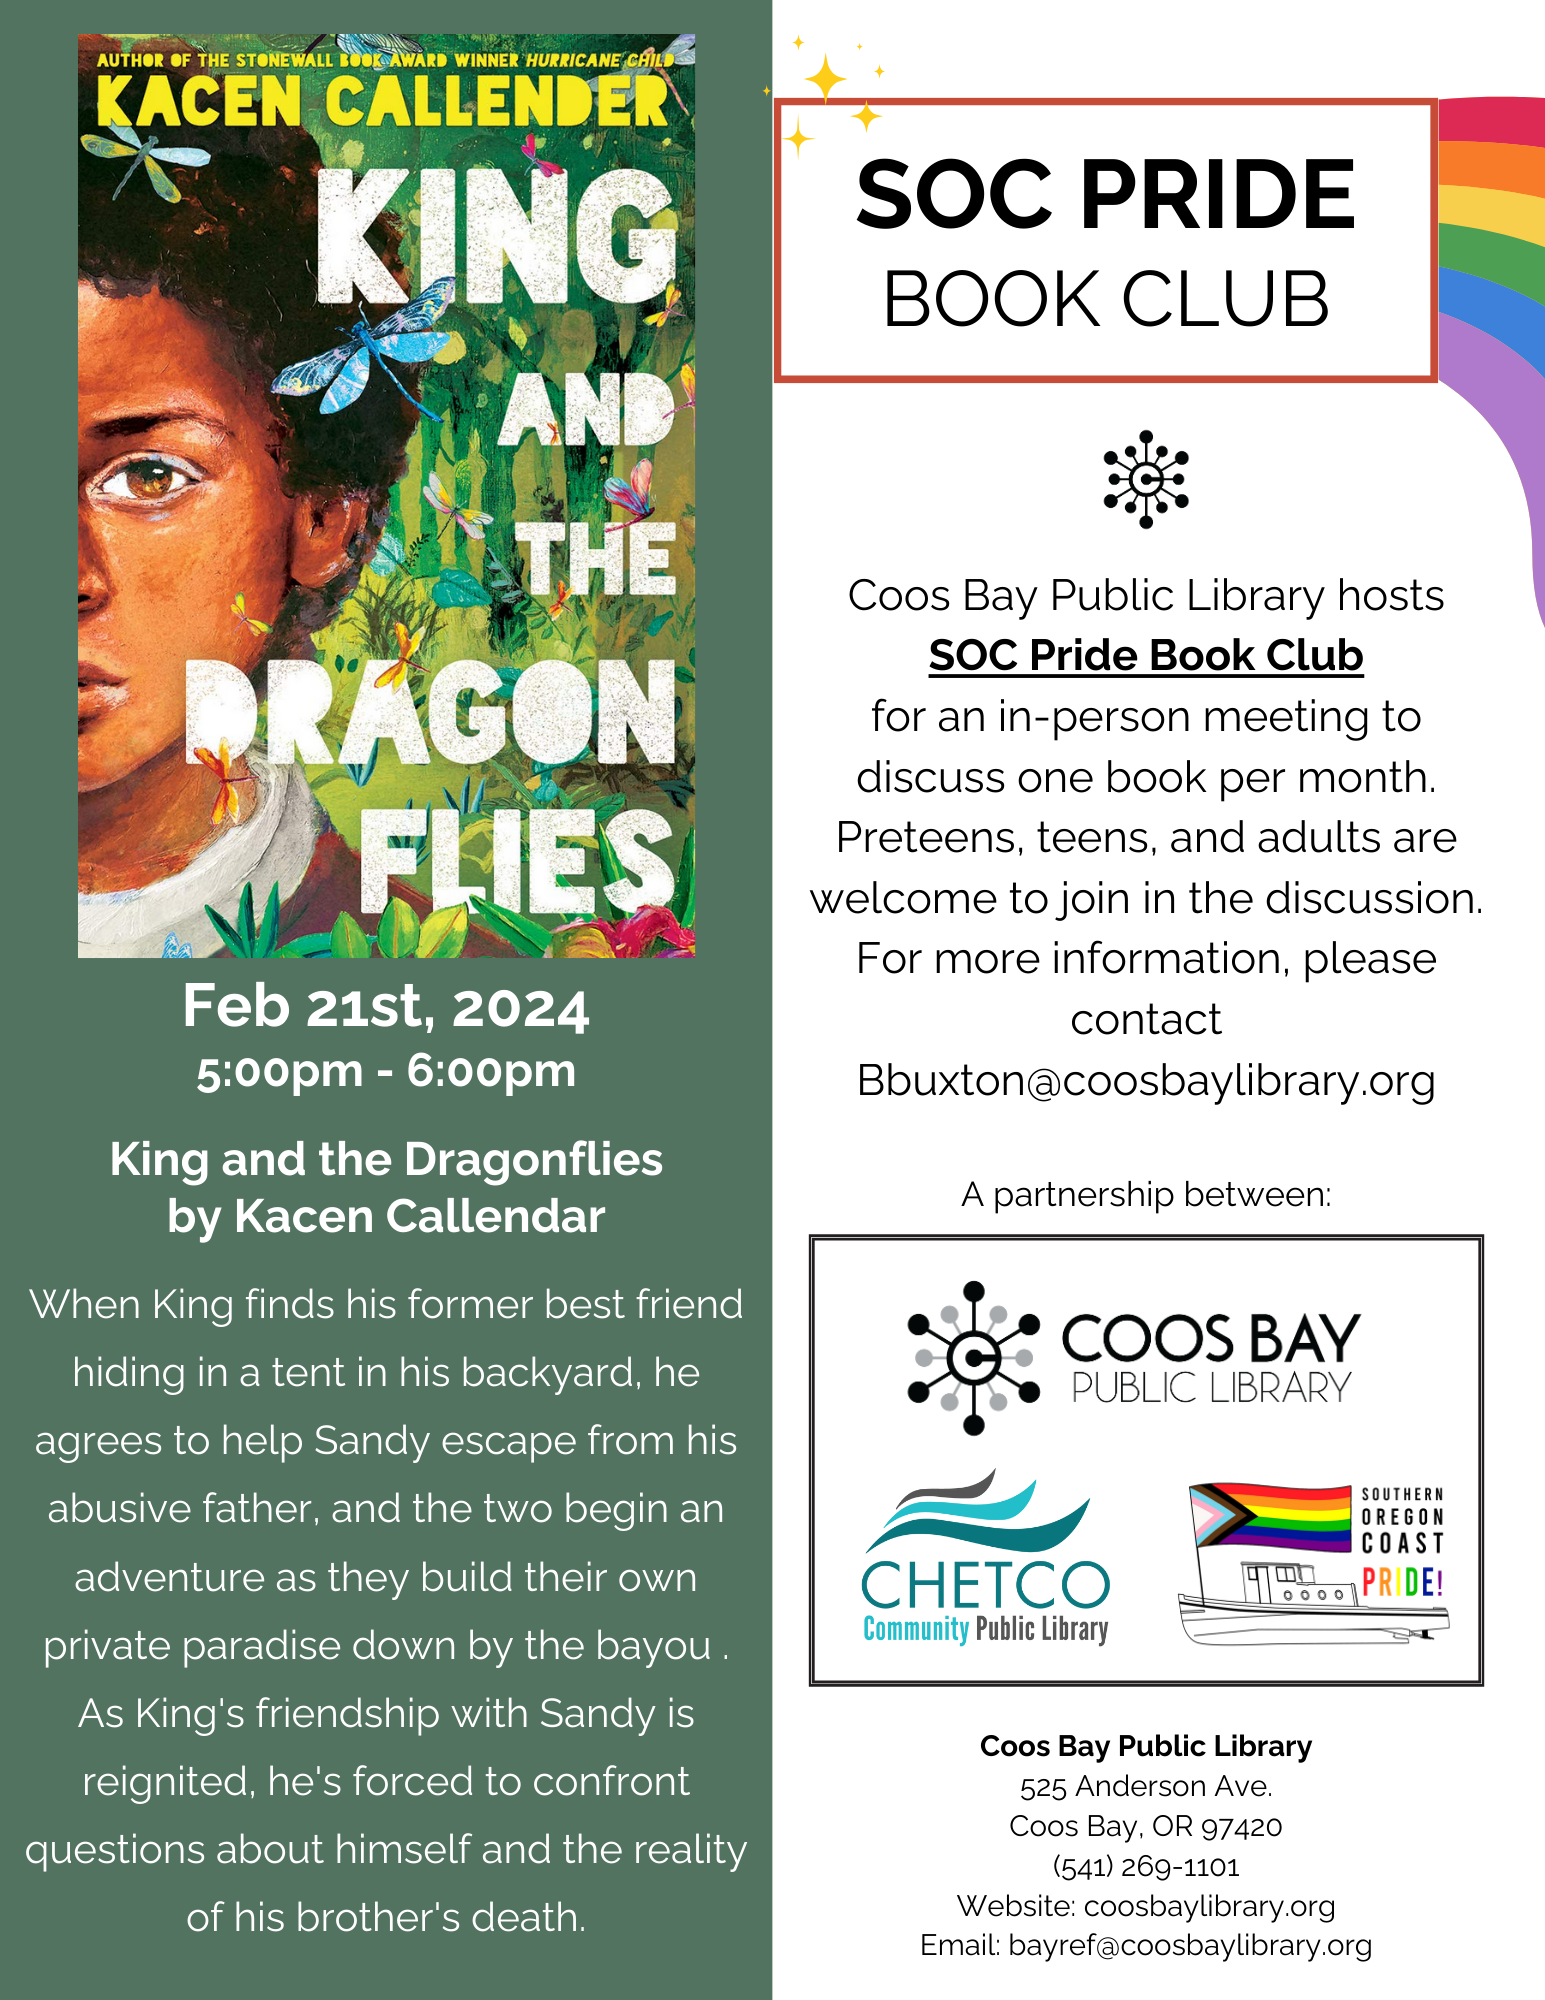 King and the Dragonflies book cover and flyer